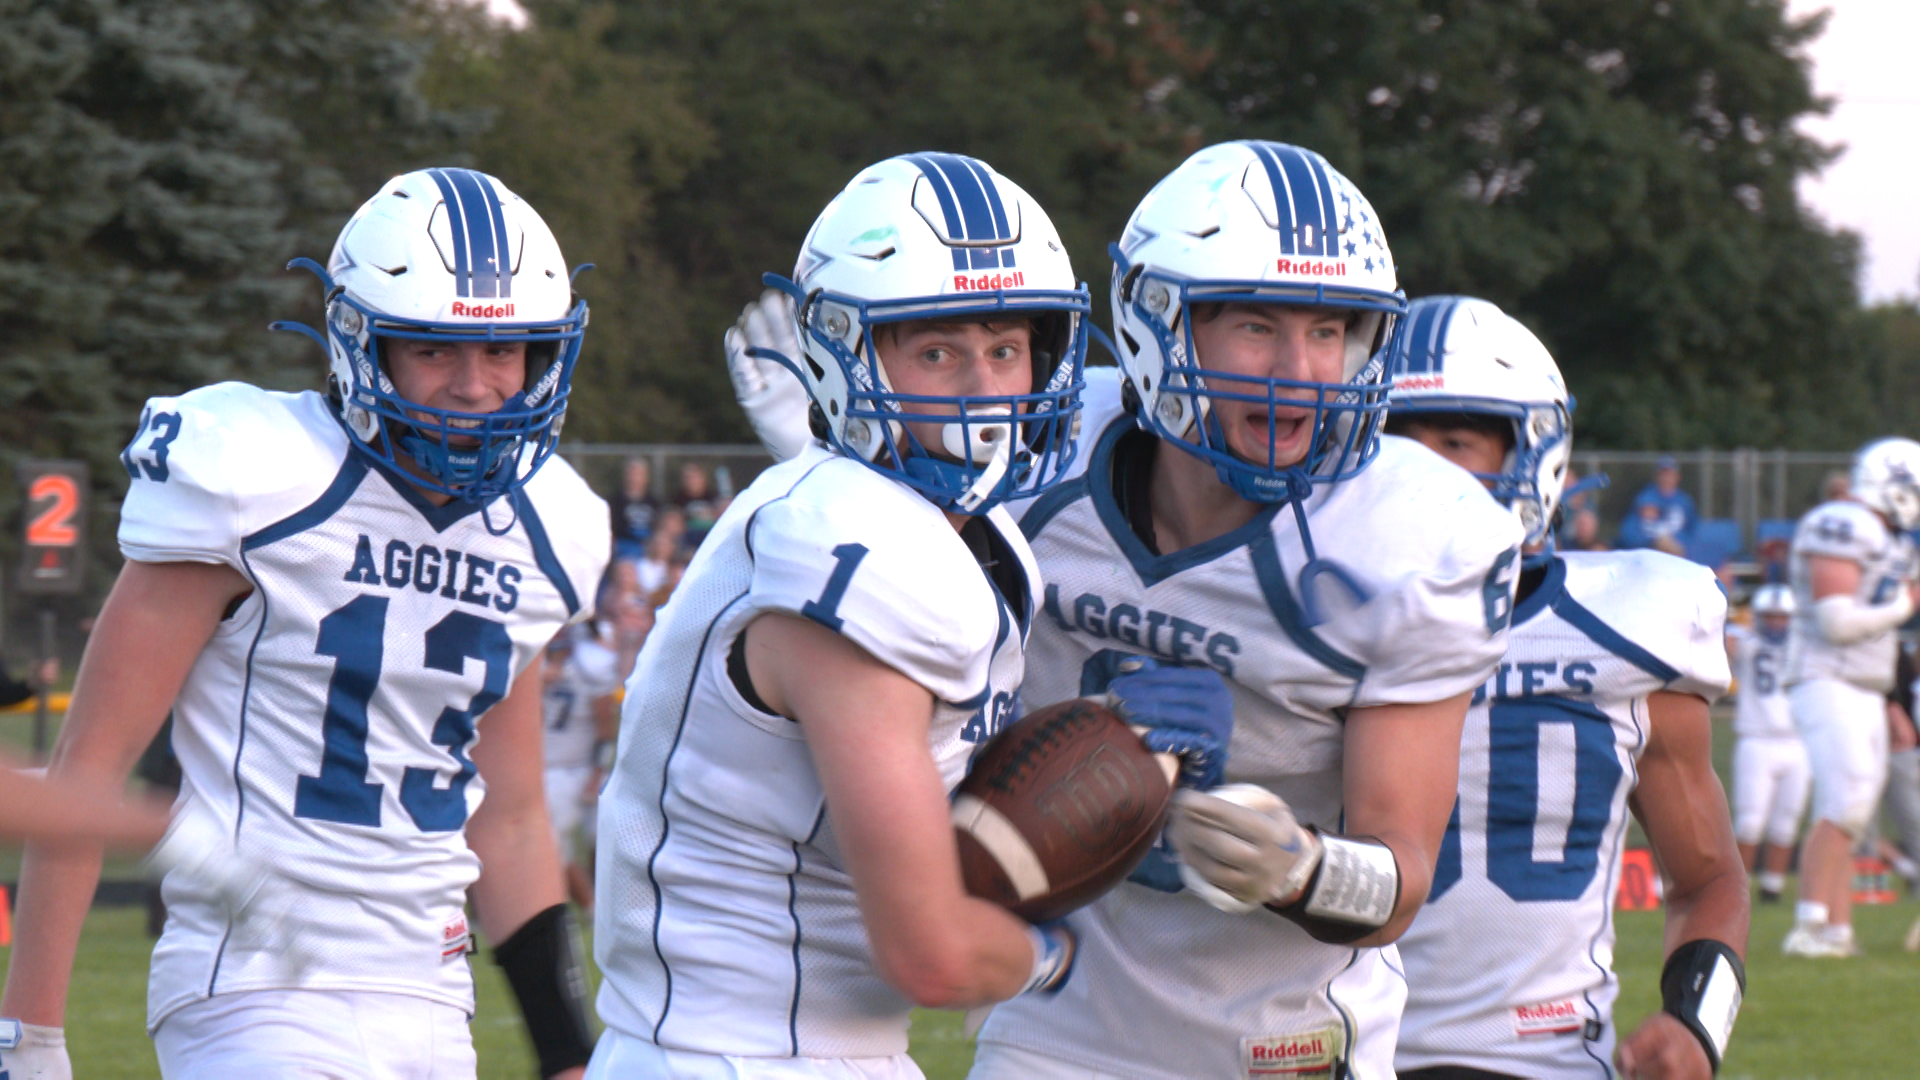 Three Beal City Aggies were selected to Division 7-8 All-State teams on Tuesday.